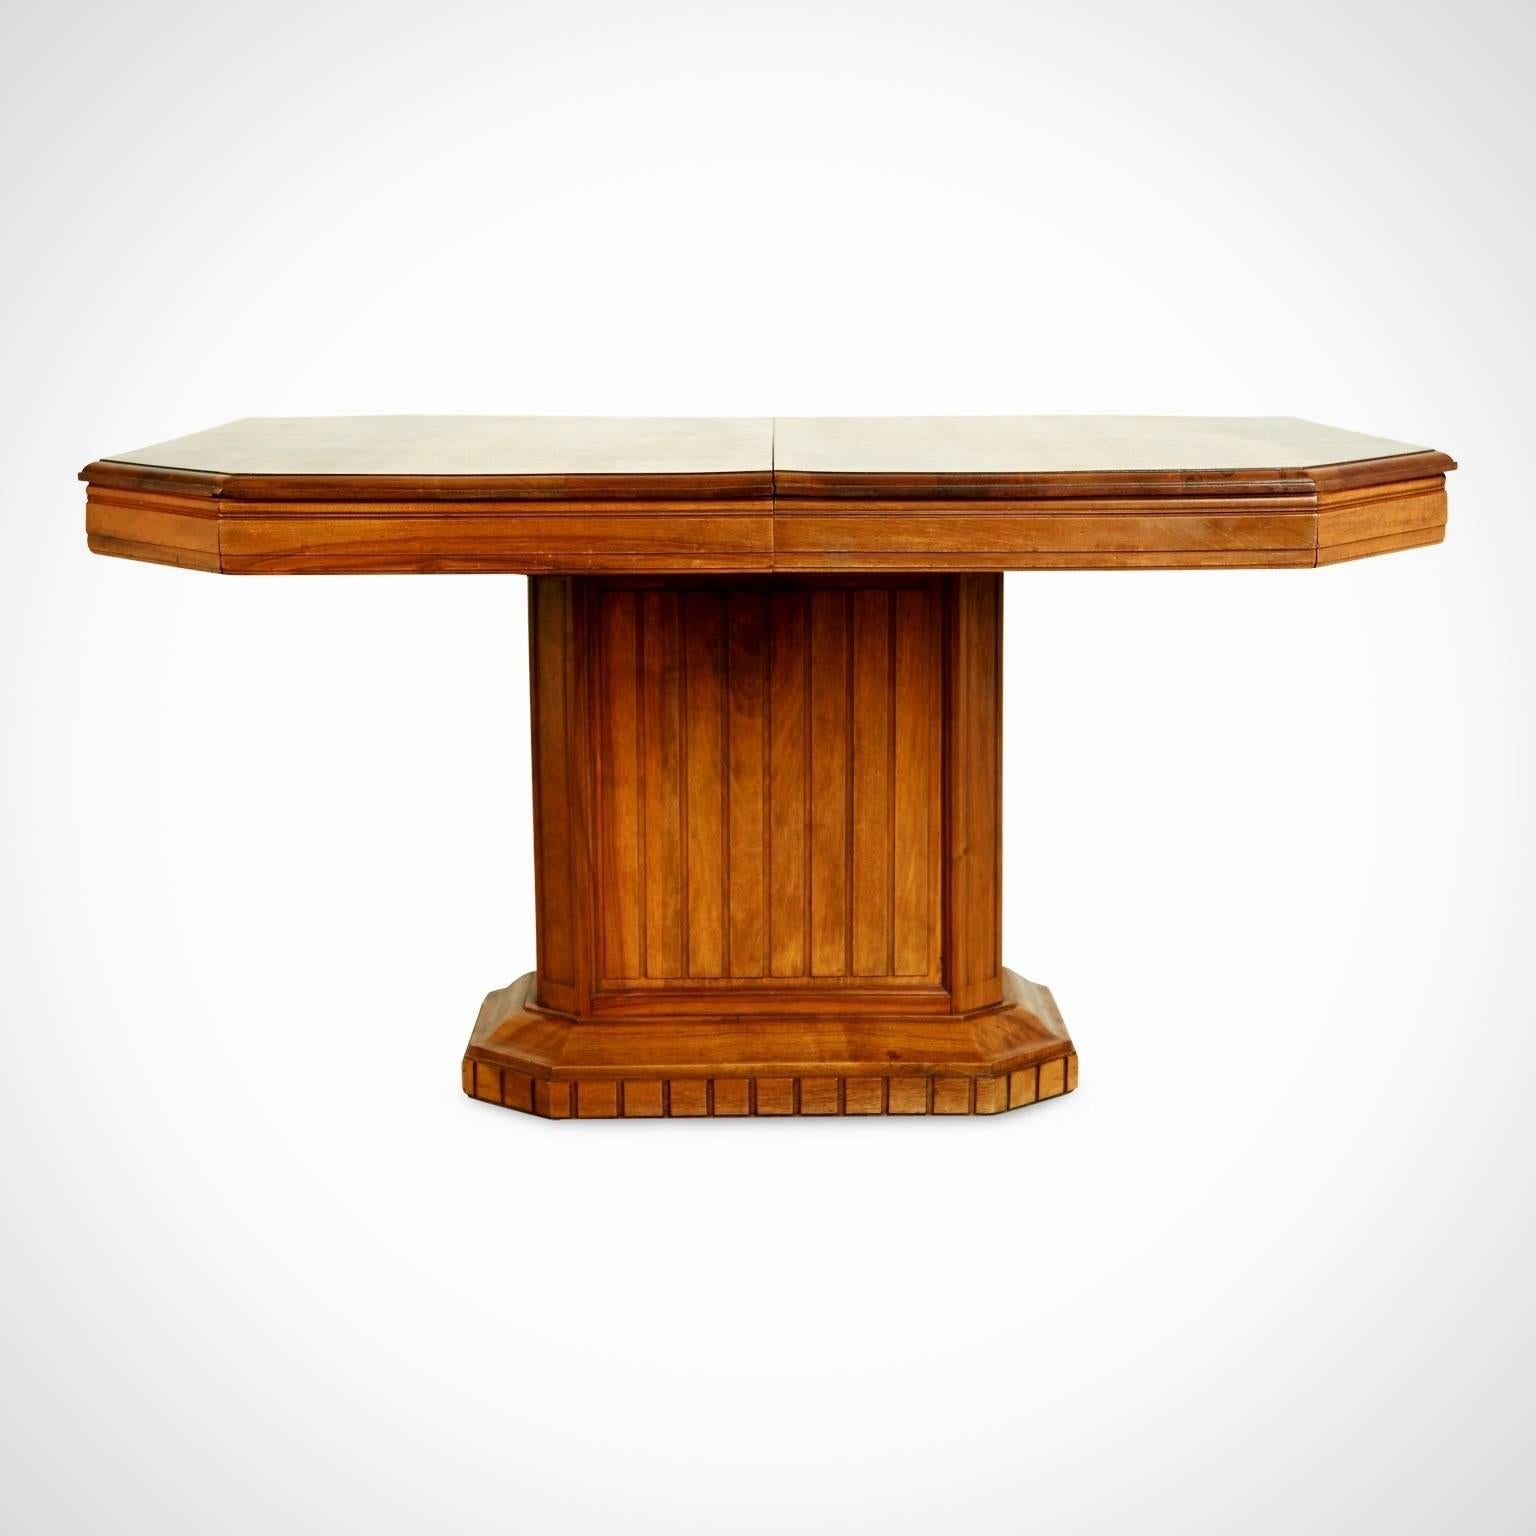 Beautiful French Art Deco dining table or center table fabricated from walnut with beautiful grain. The expansive surface with beveled edge sits atop a sturdy rectangular plinth base with carved channel detail. 

The cleanly executed style of this